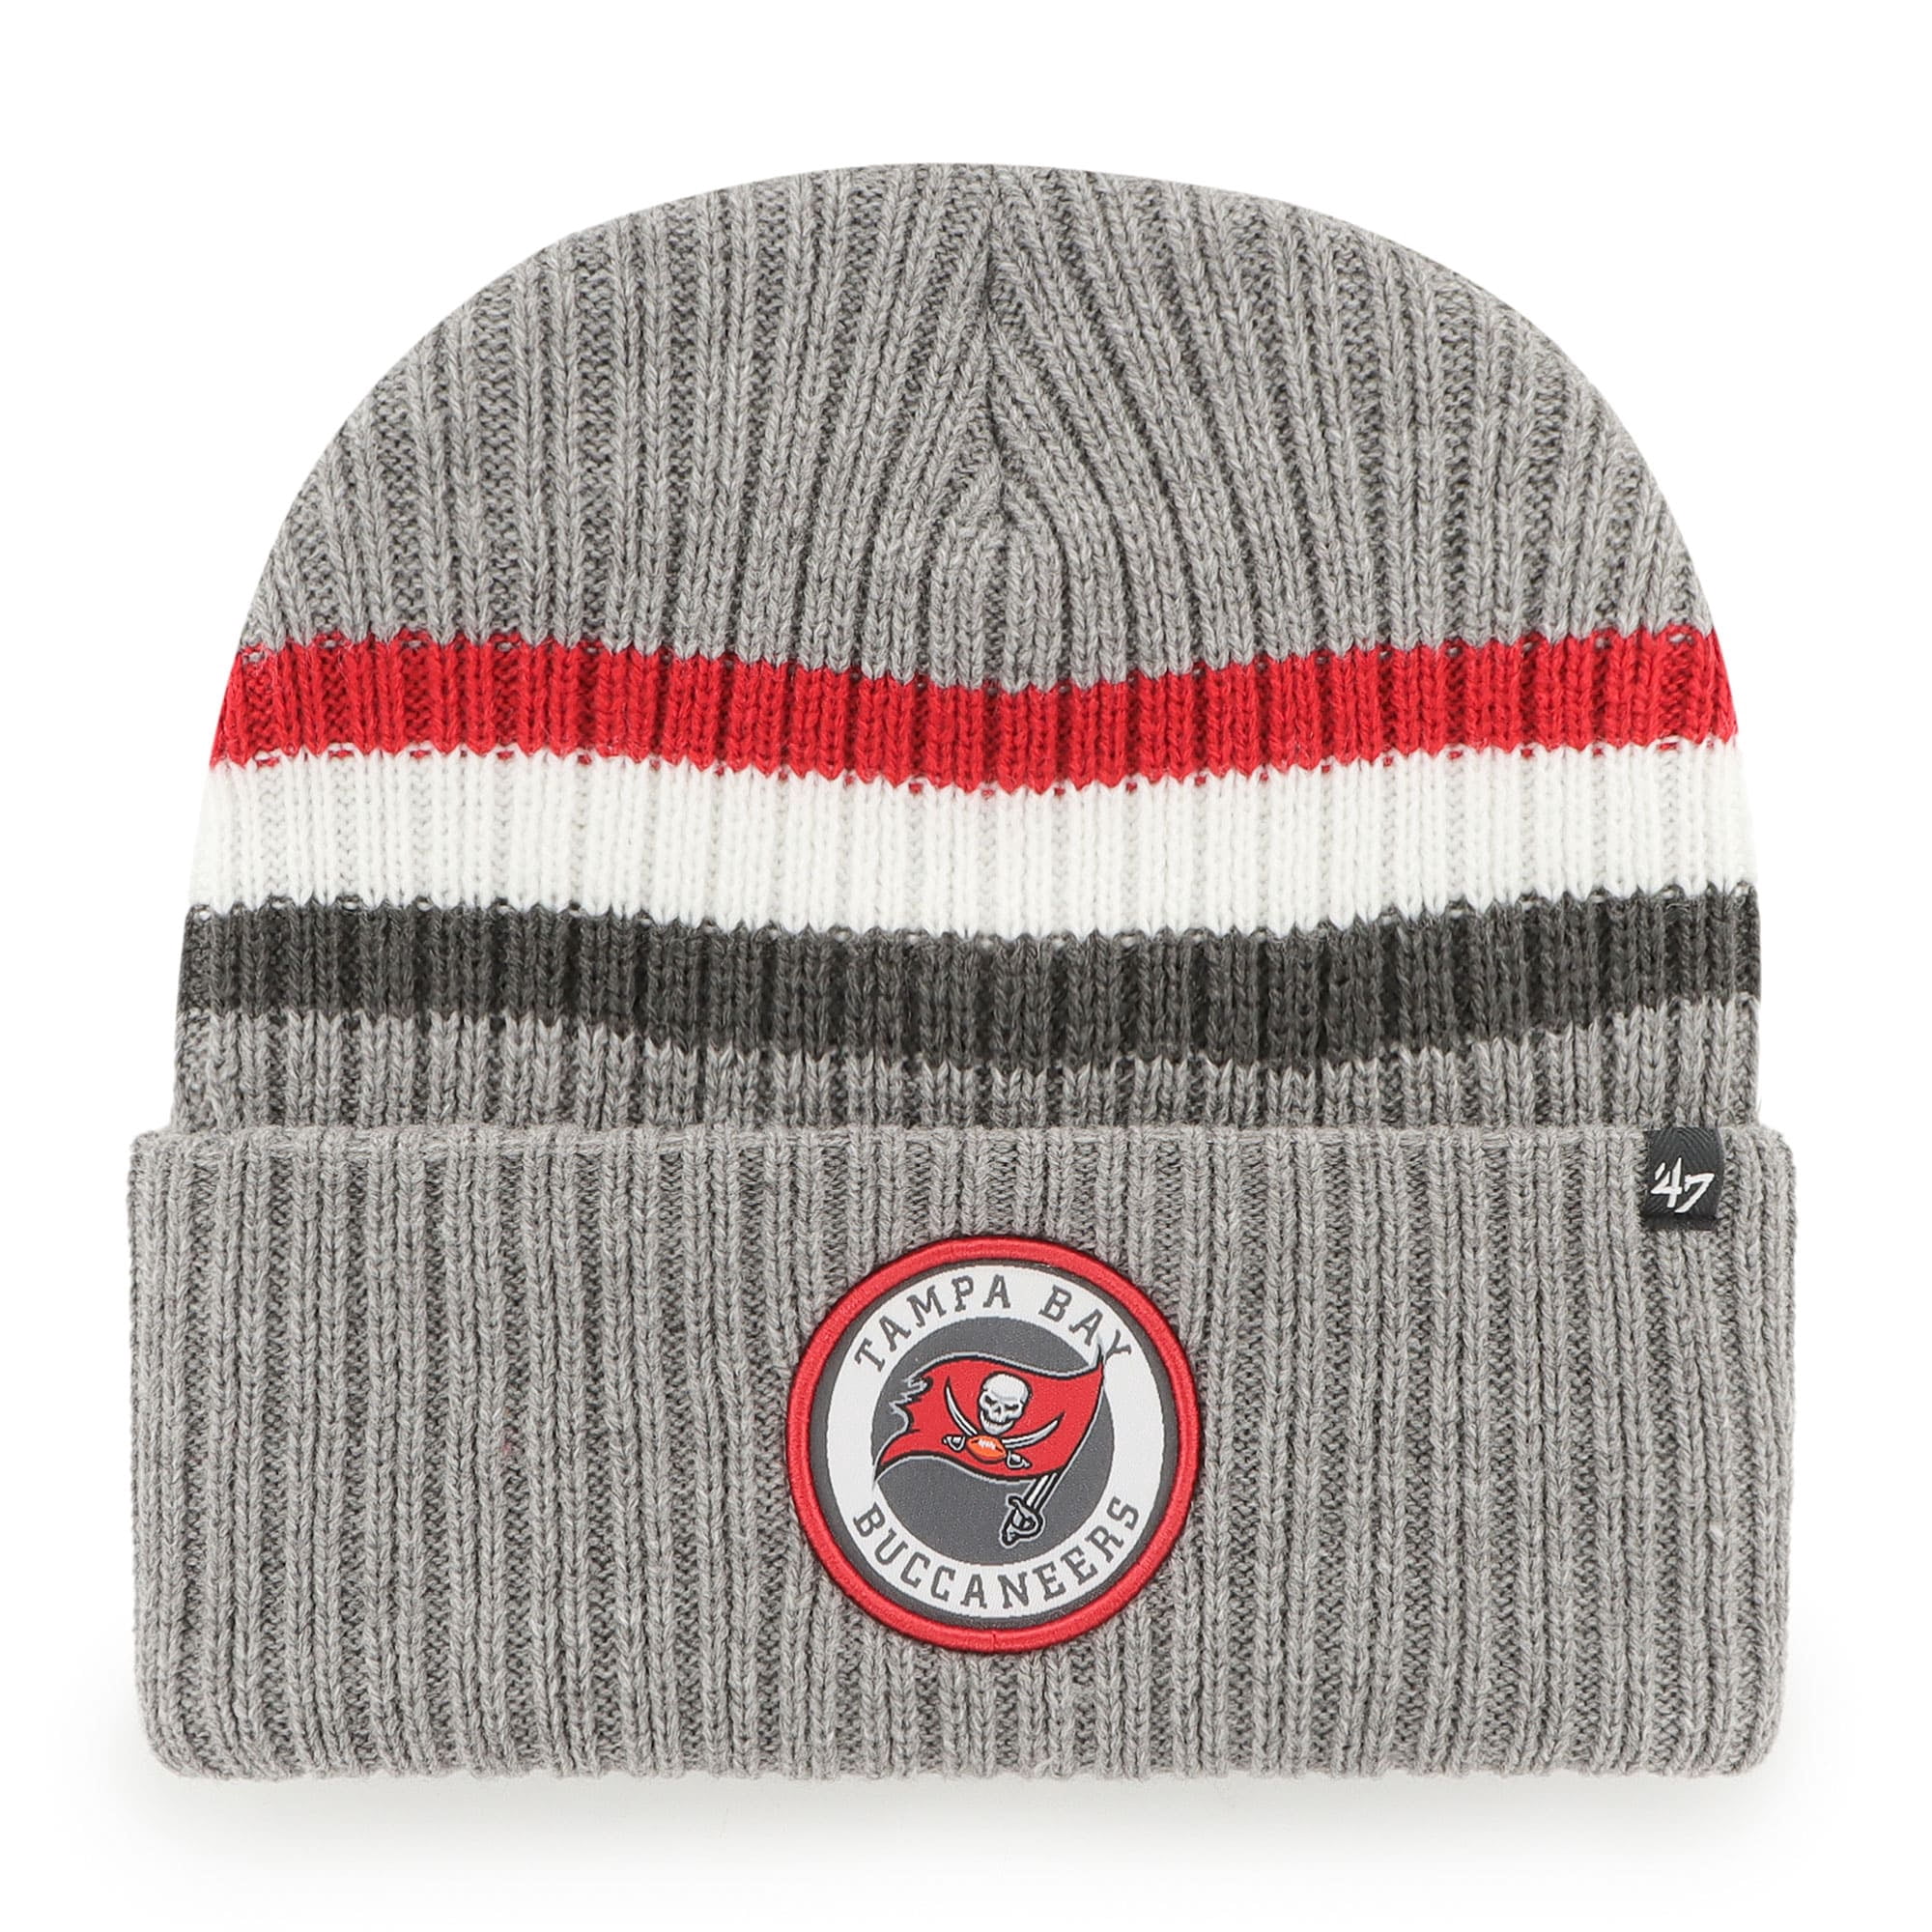 Men's '47 Gray Tampa Bay Buccaneers Highline Cuffed Knit Hat - OSFA 